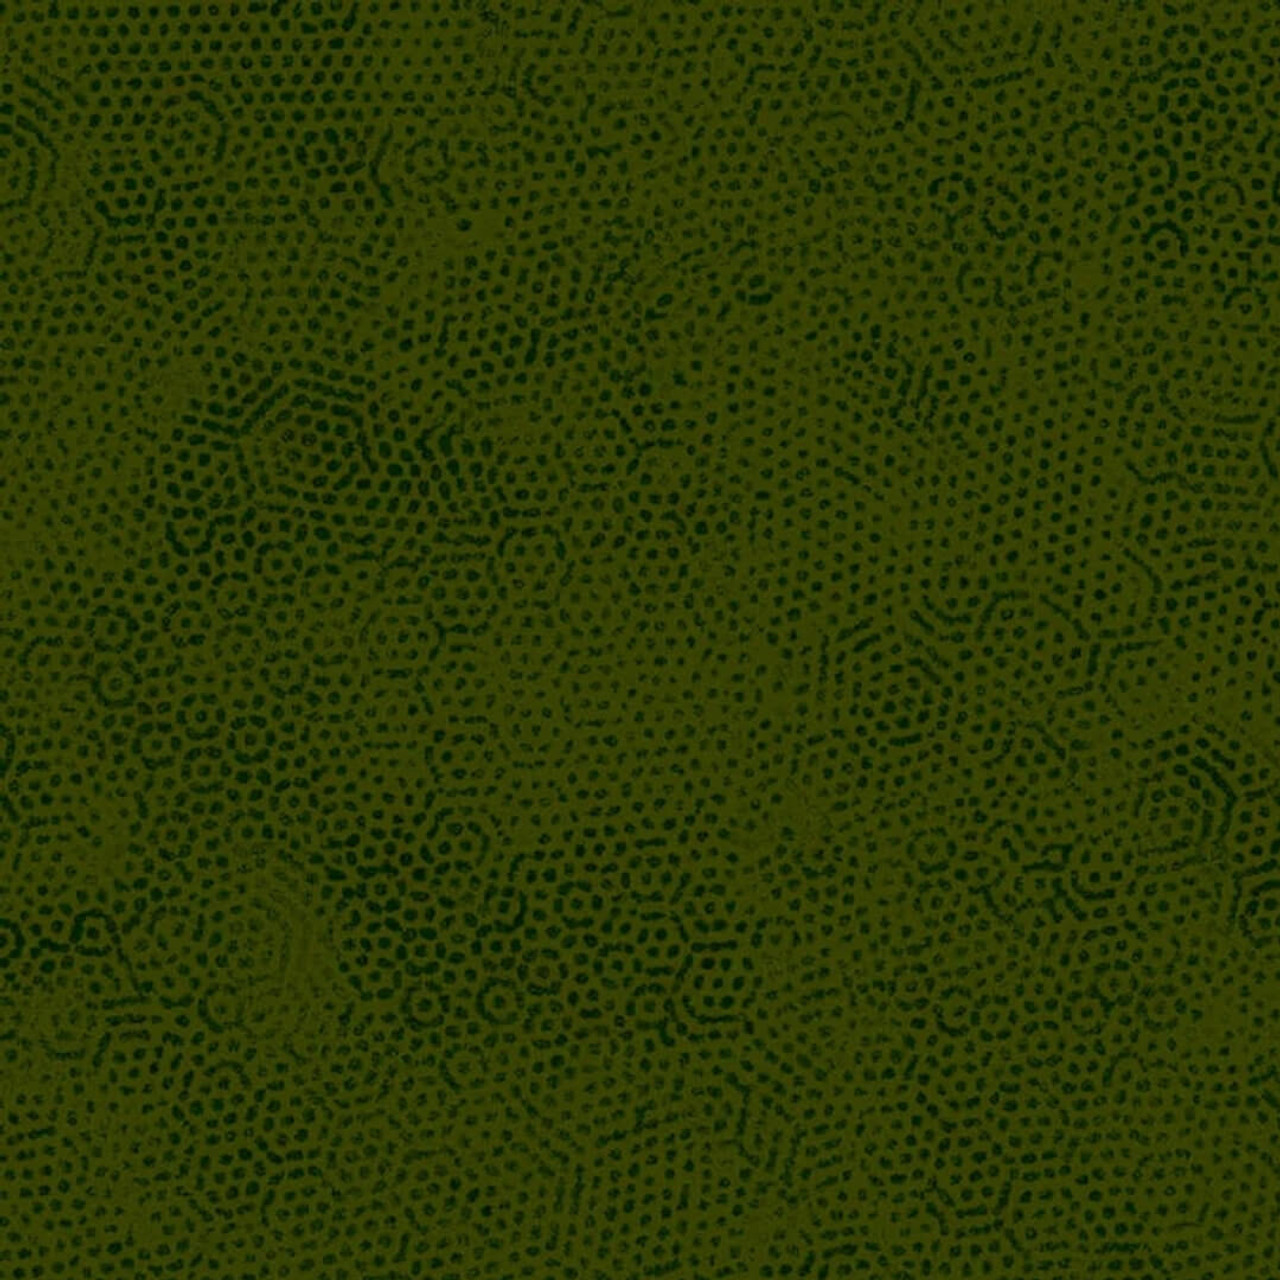 Close up of Andover Fabrics Dimples Collection Avocado quilting fabric with dark green dimpled texture.